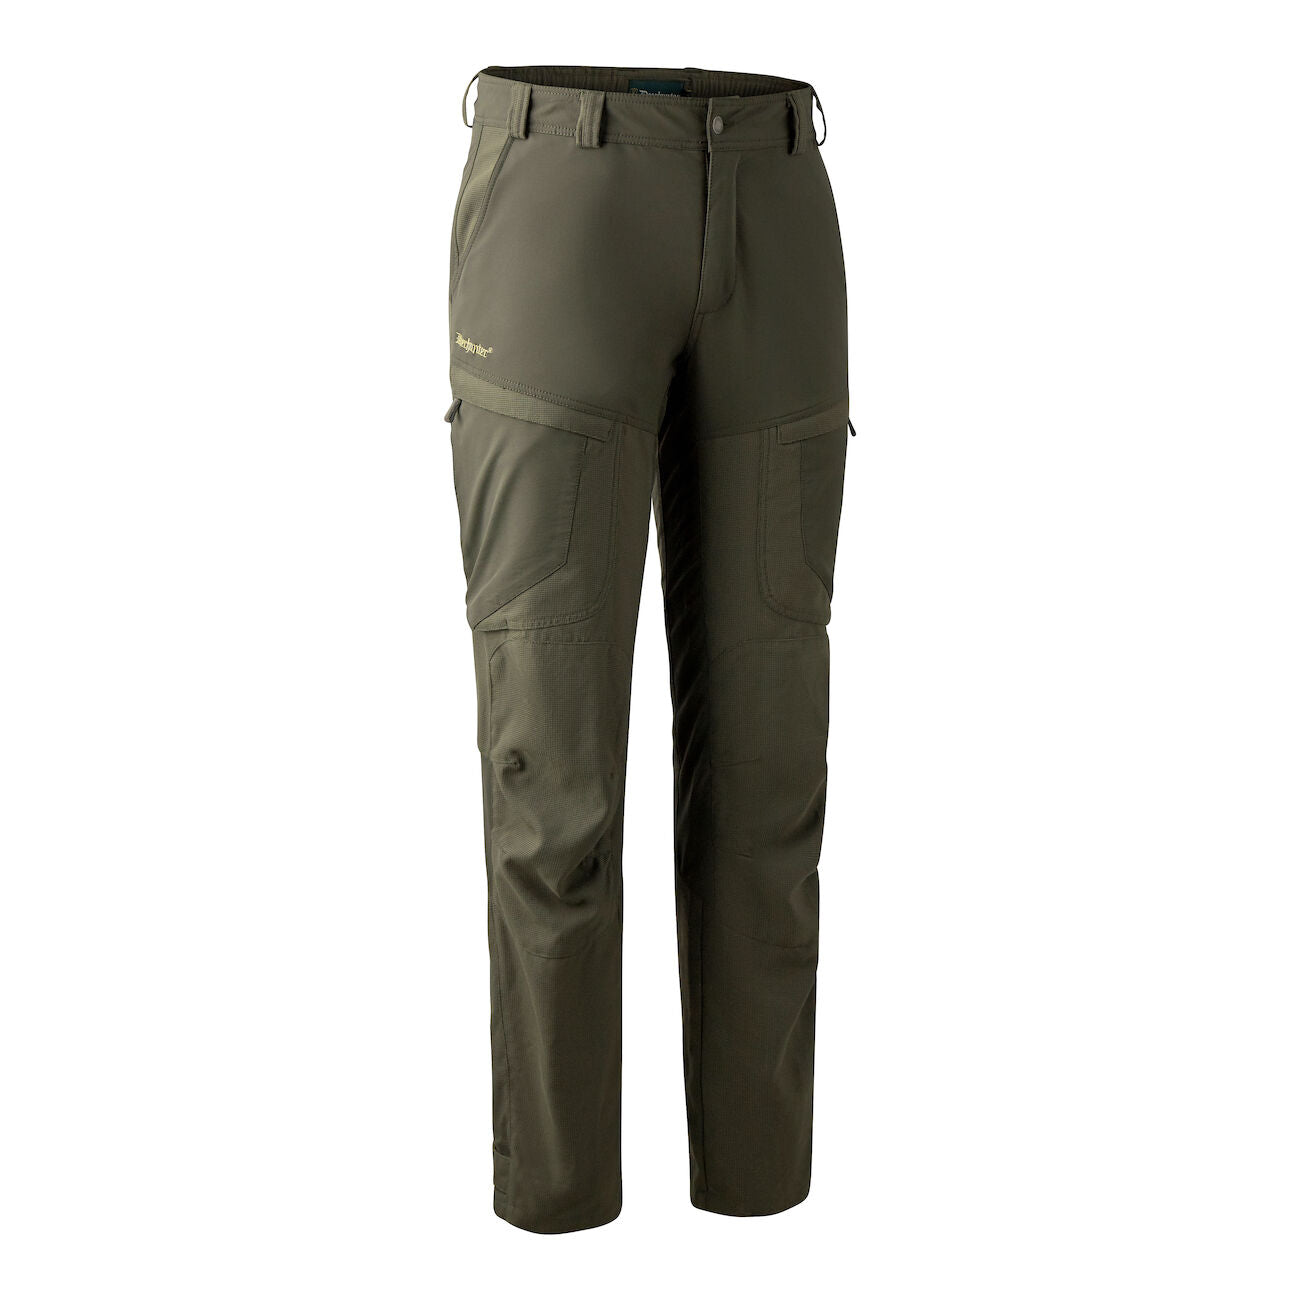 Strike extreme trousers